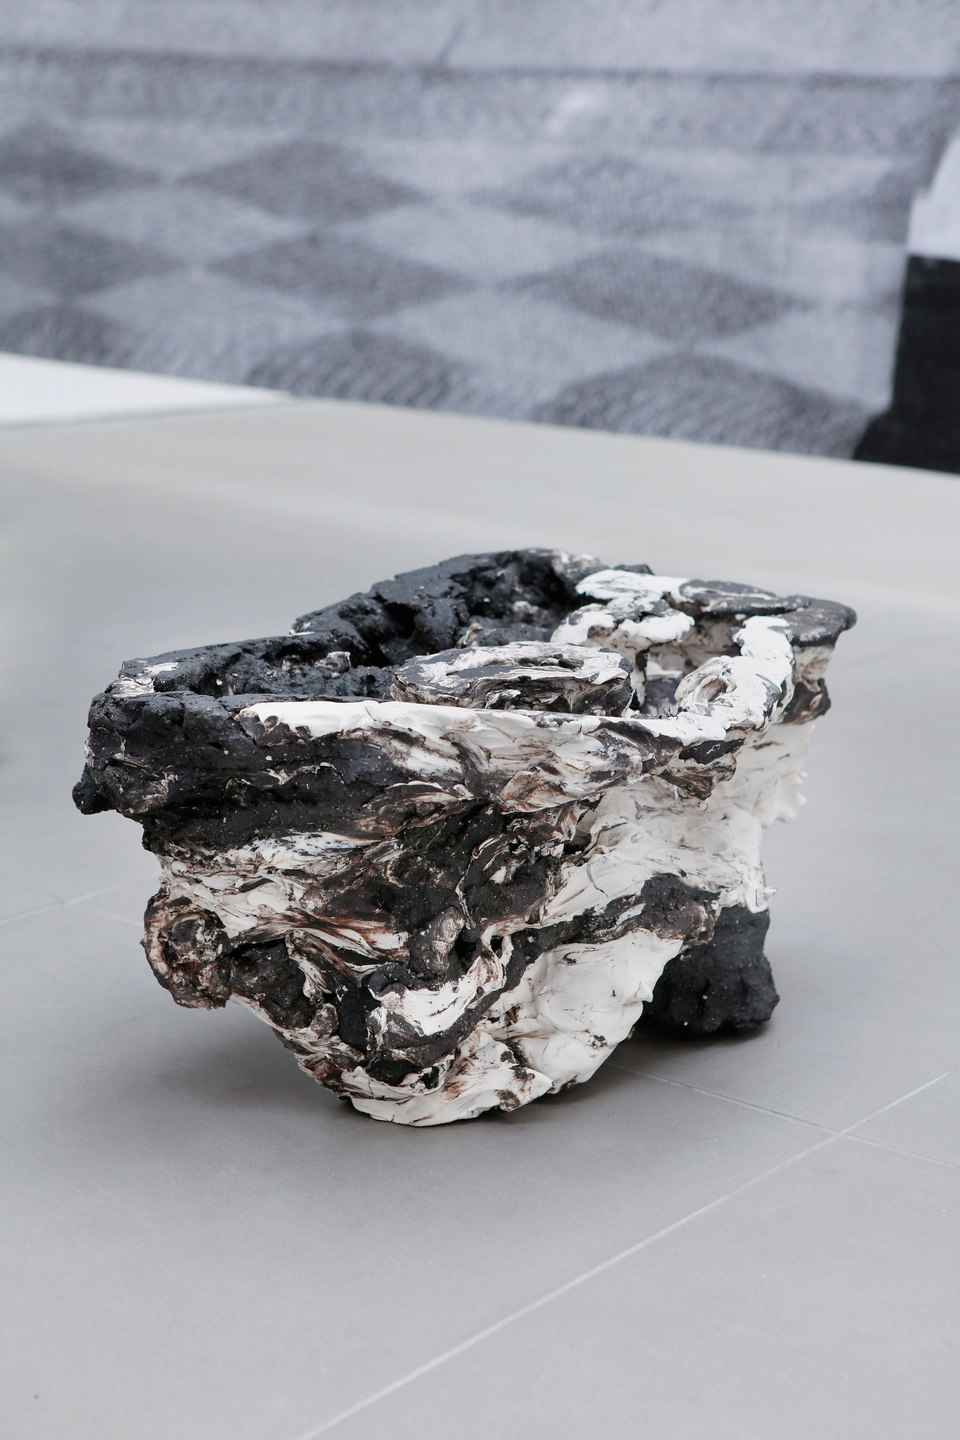 Peles Empire, Formation, 'formation 4', 2013, unglazed porcelain with black grog, h. 52 x w. 28 d. 26 cm, Cell Project Space